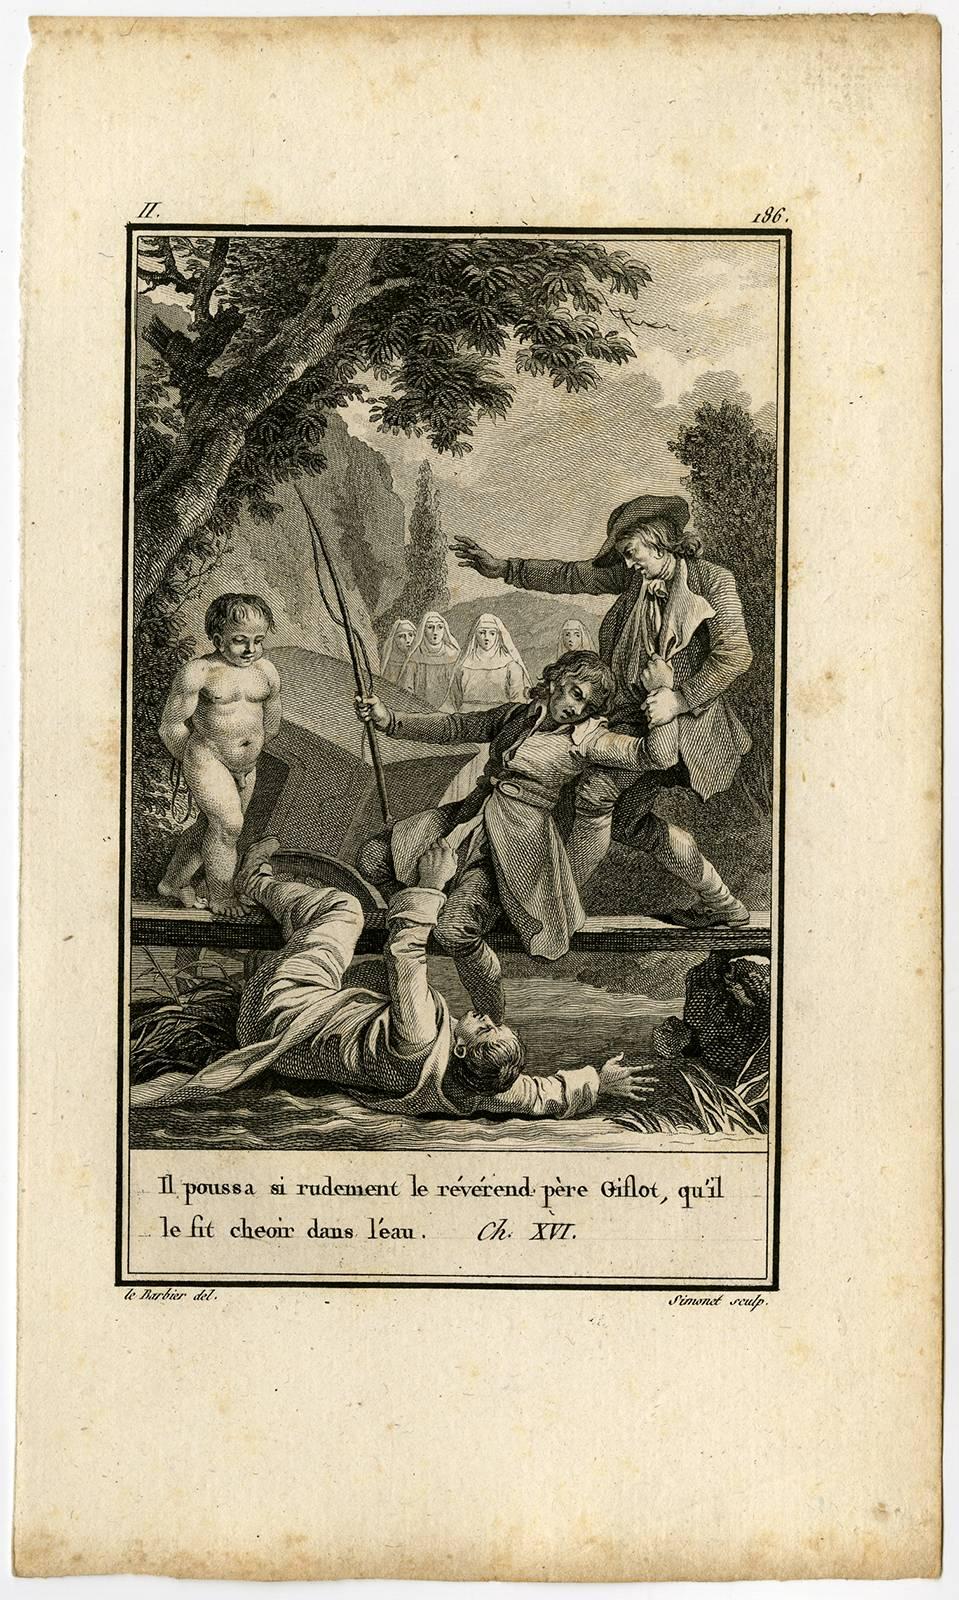 Etching on laid paper.

Illustrations to the Roman comique by Paul Carron.

Made by Several engravers after Jean Jacques Francois Le Barbier. 
Several engravers Jean-Jacques-Francois le Barbier / Lebarbier, the elder (1738-1826) was a French history